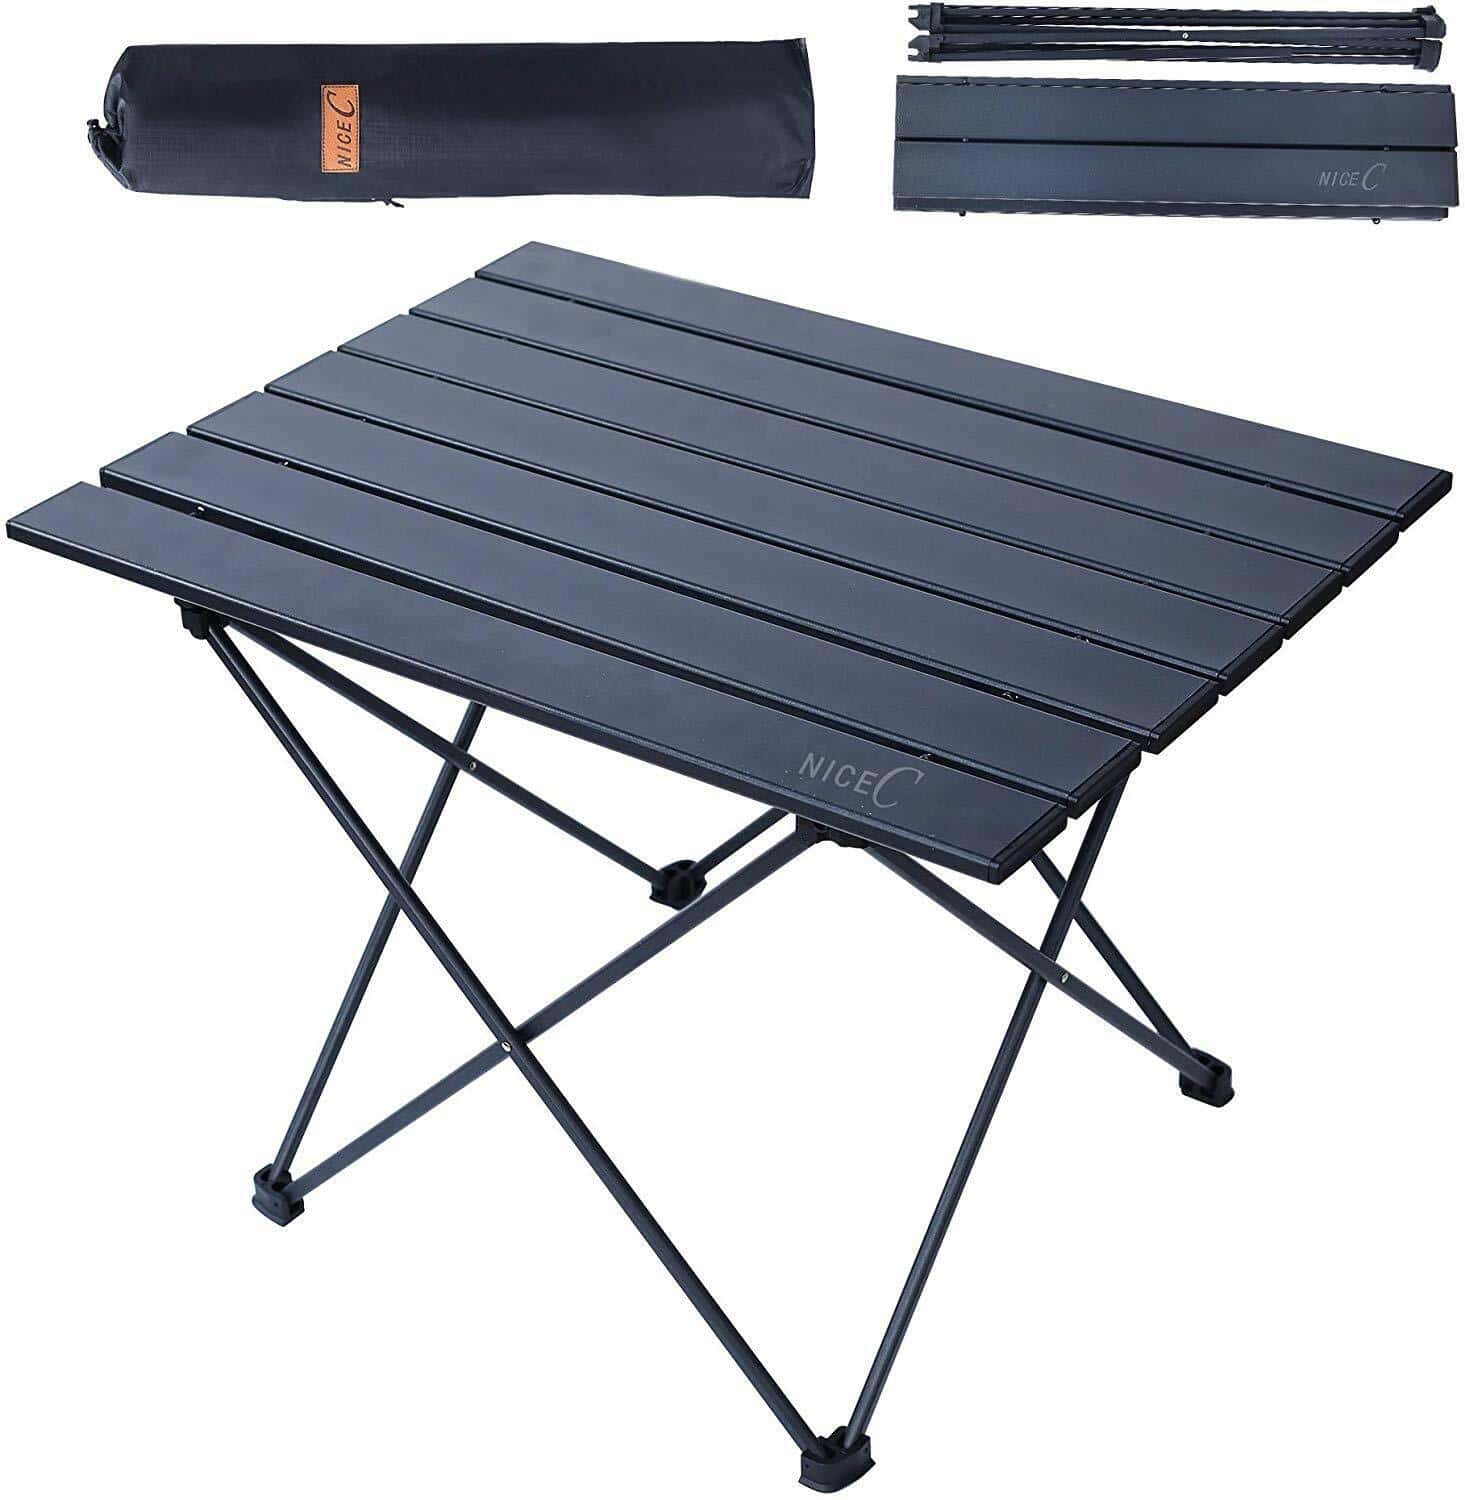 A black folding table with a carry bag.